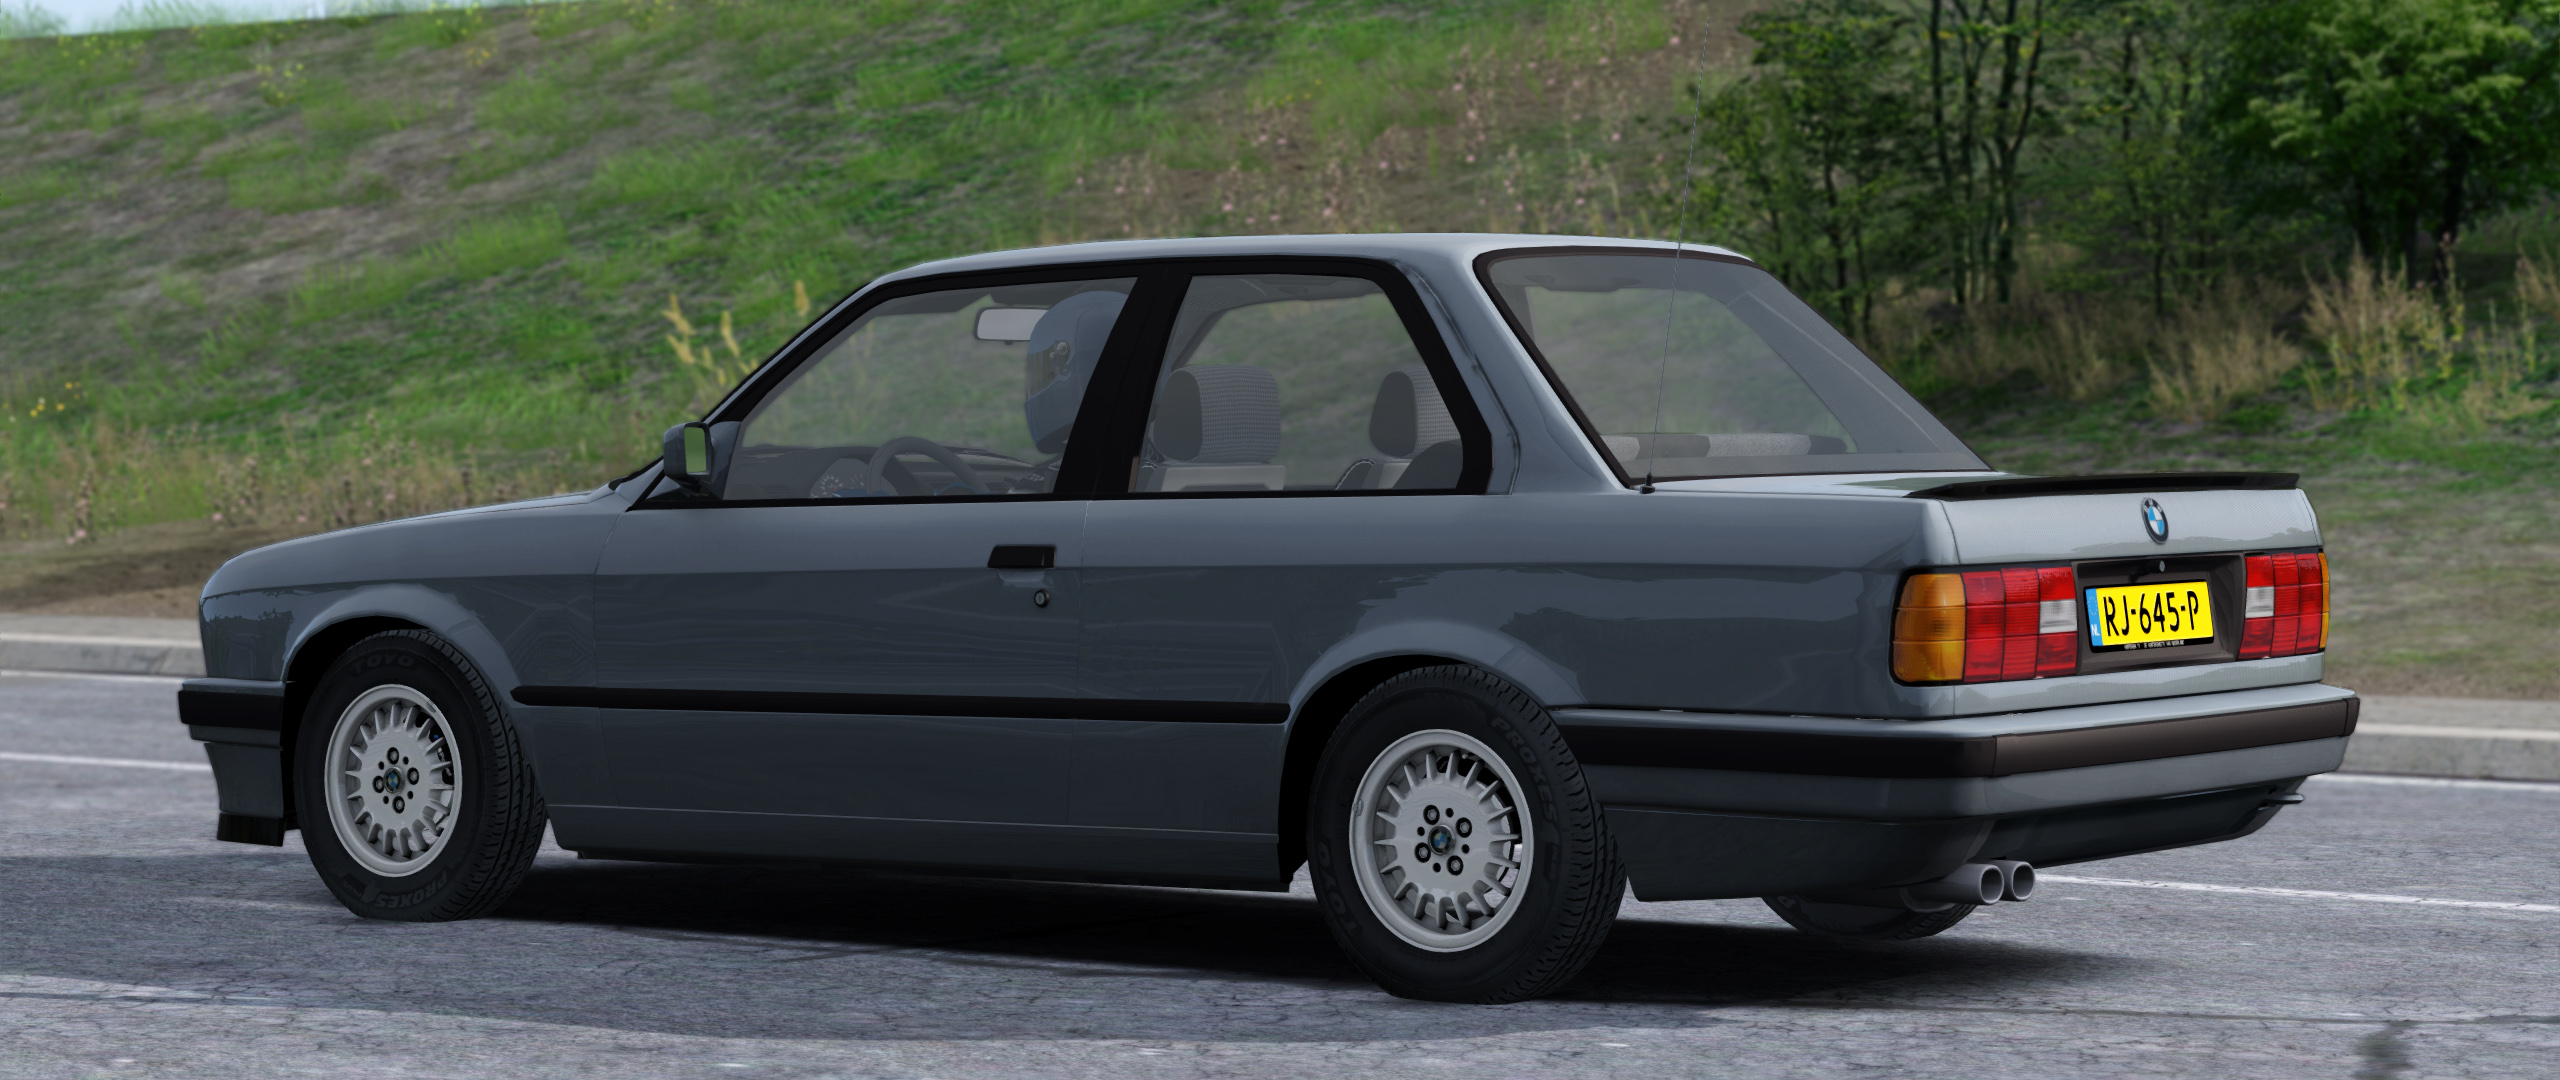 BMW E30 325i Coupe Untitled-32-recovered-recovered-recovered-recovered-recovered-recovered-jpg